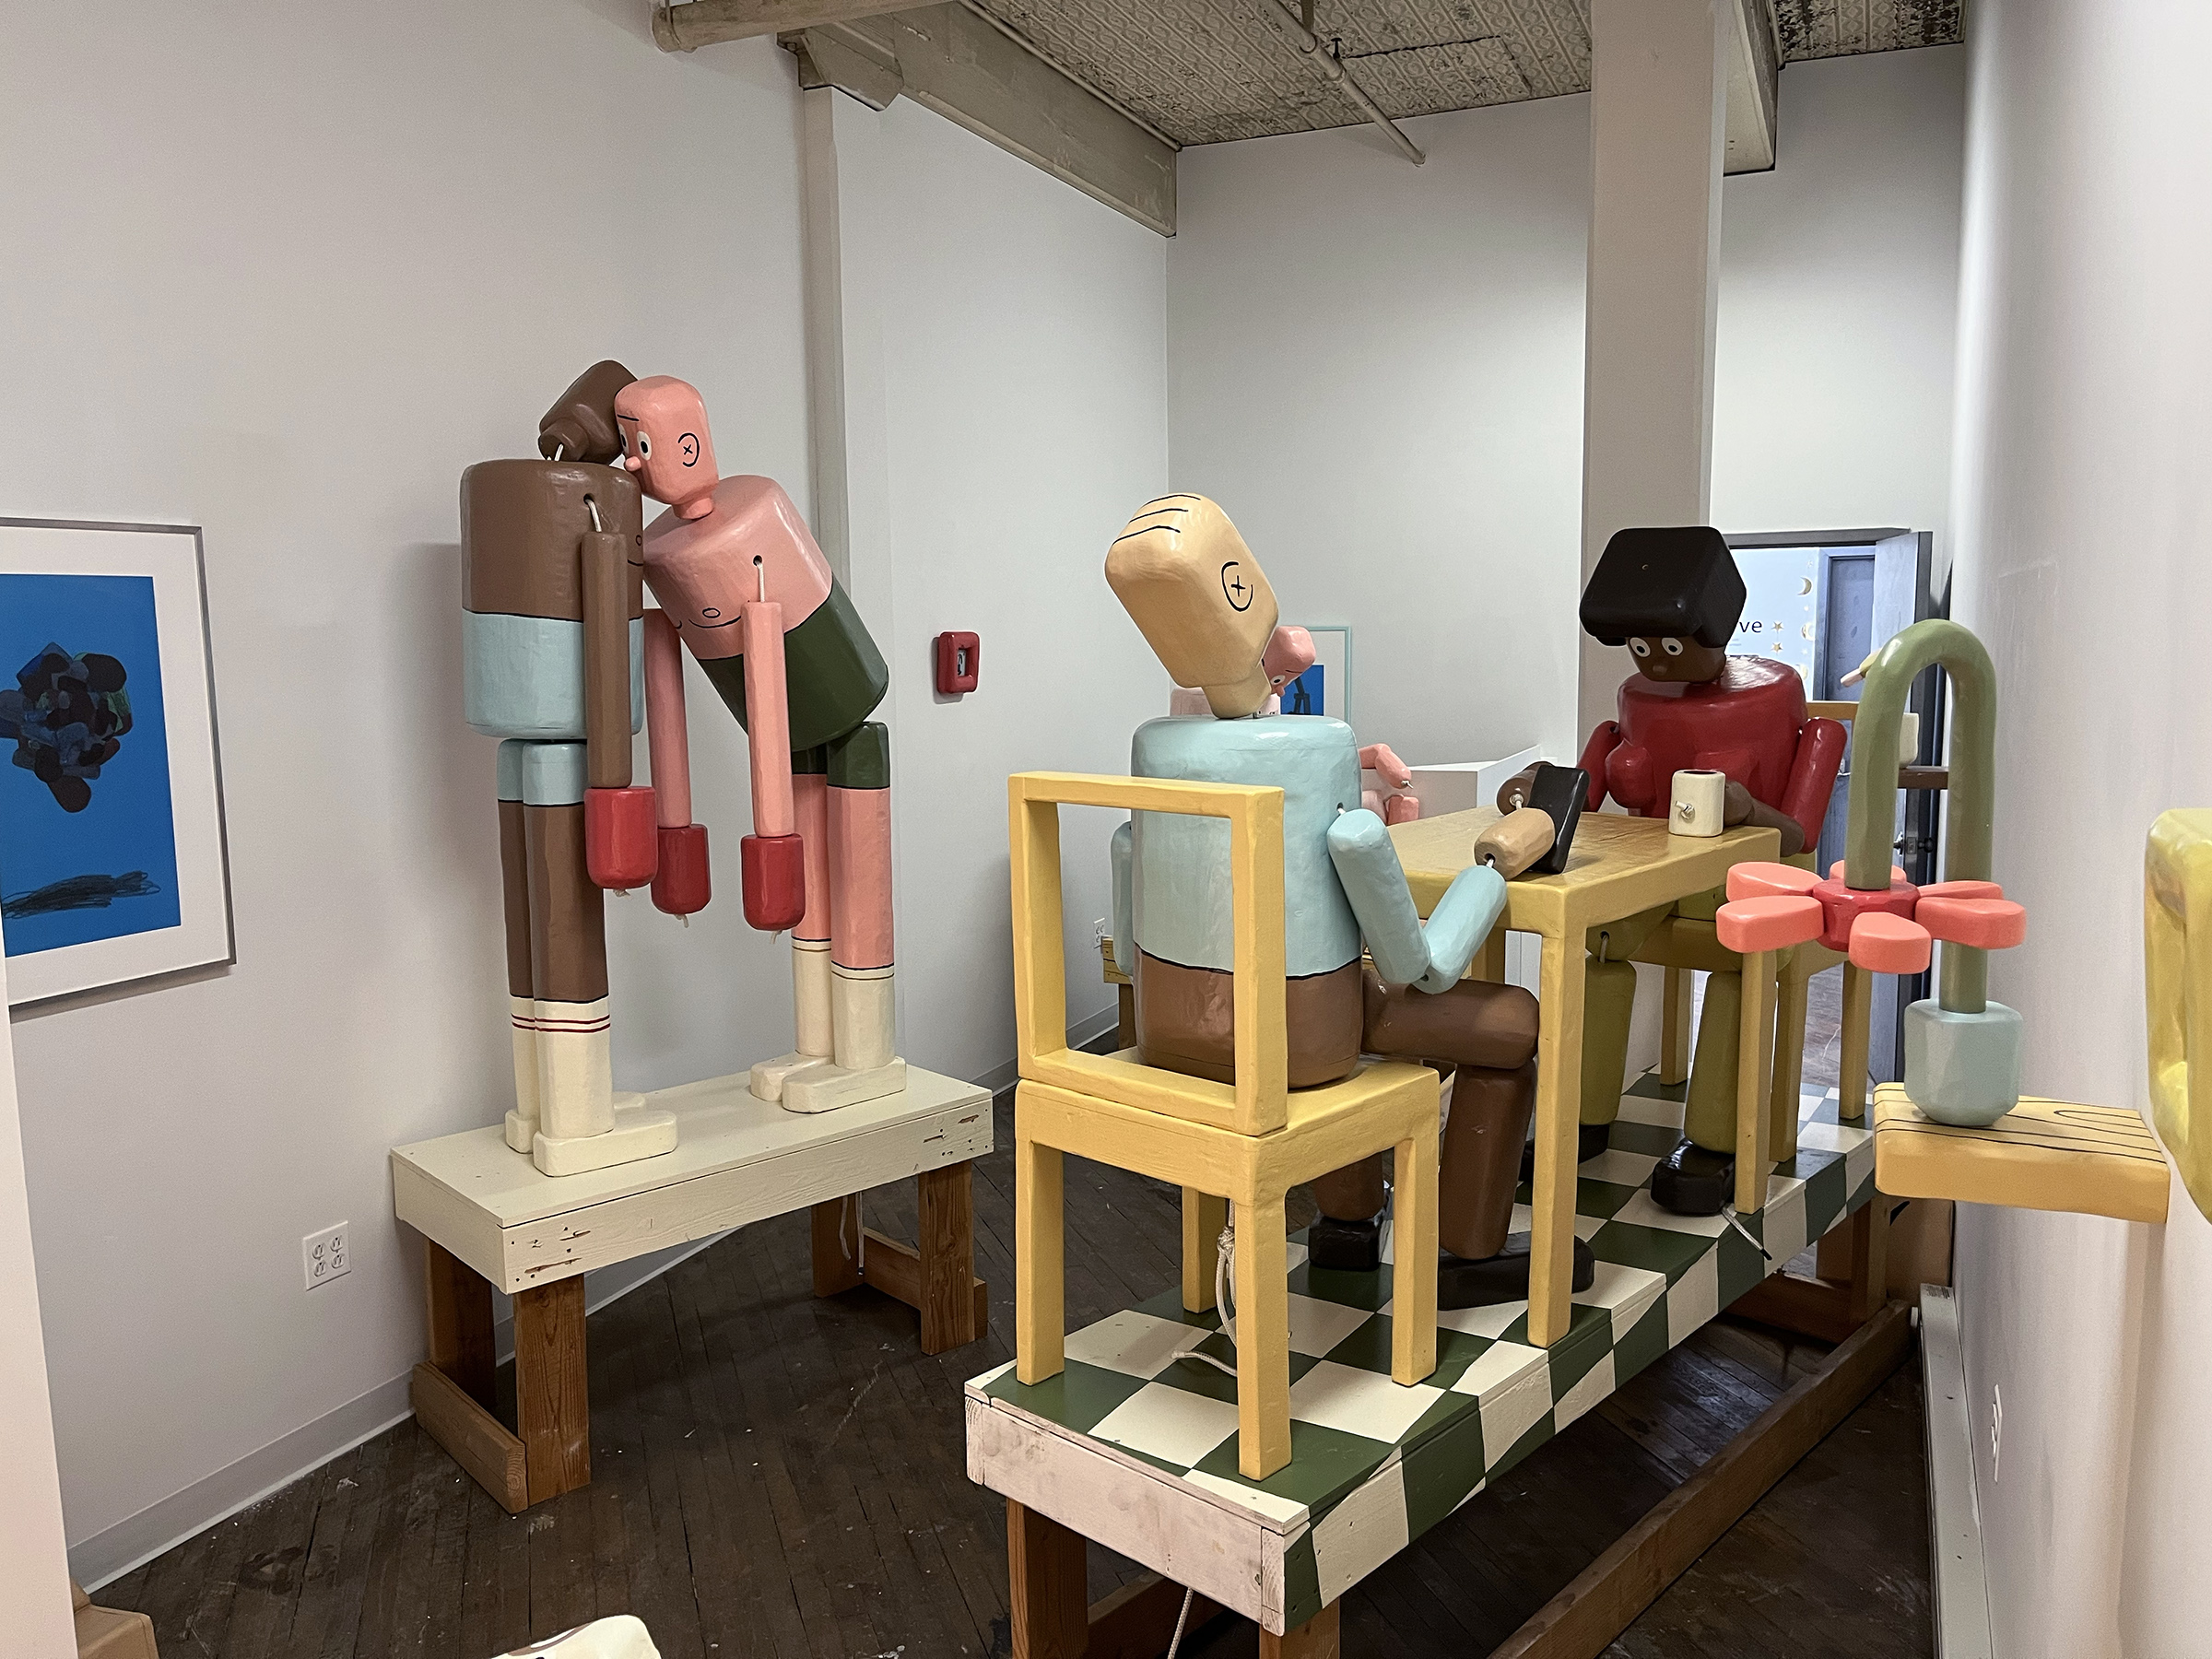 A photograph of an art installation featuring multiple figurative wooden sculptures. The life-sized sculptures resemble push puppet toys.